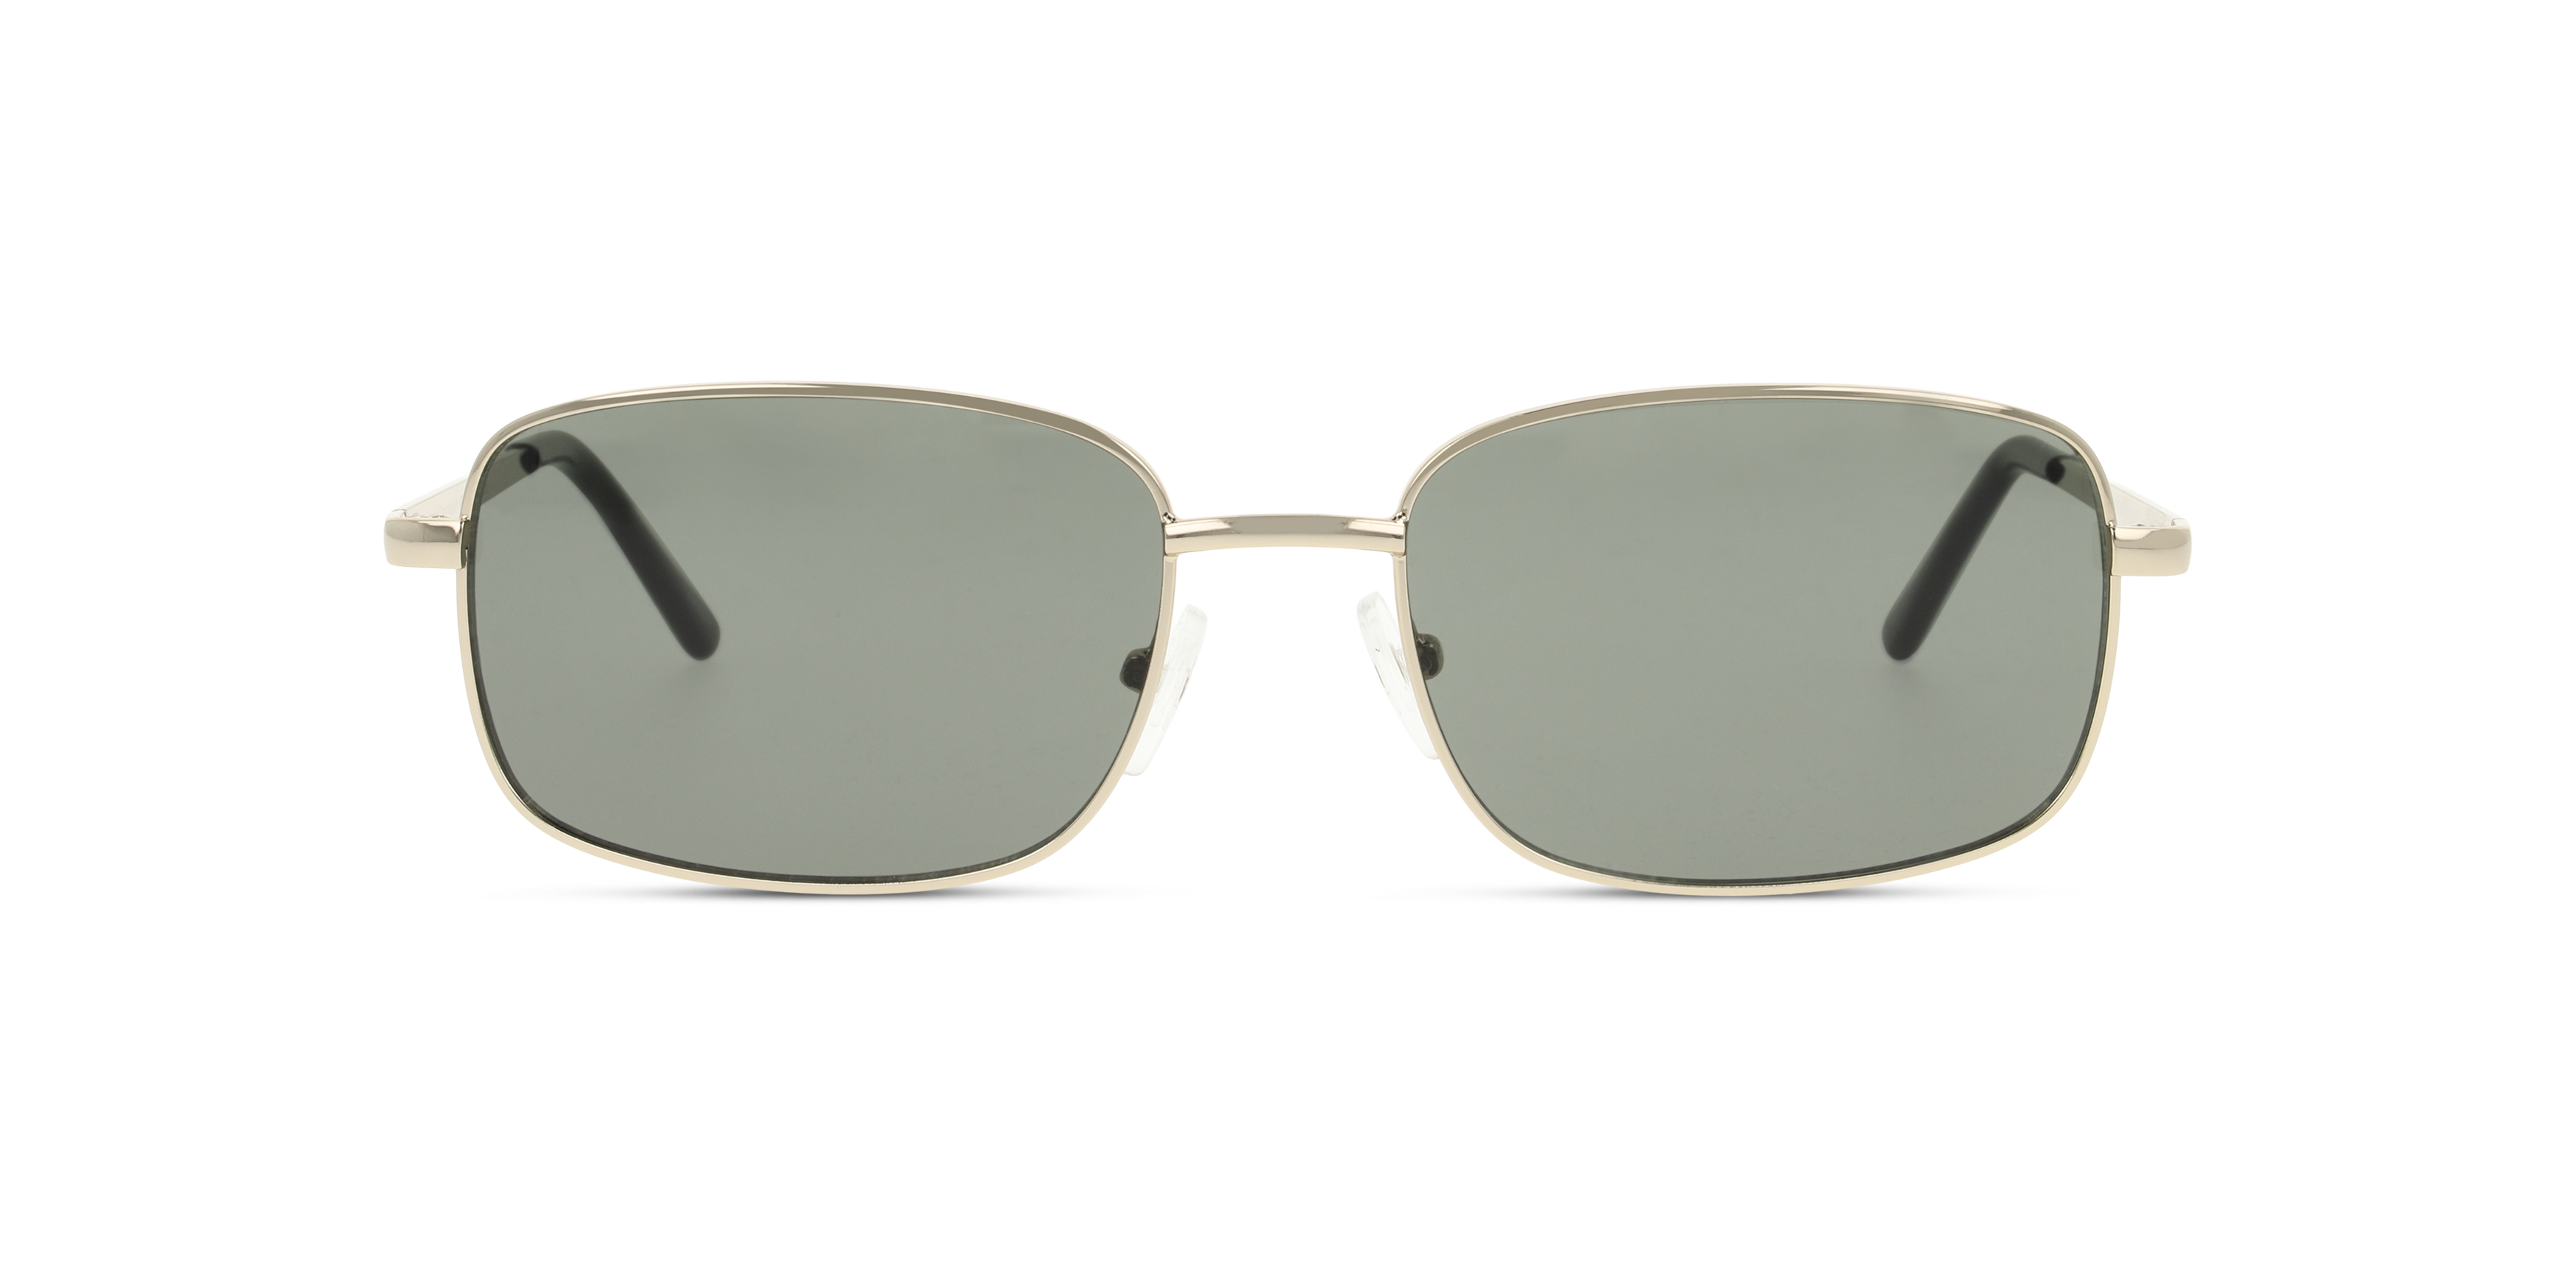 [products.image.front] Seen SN SM0017 Sunglasses